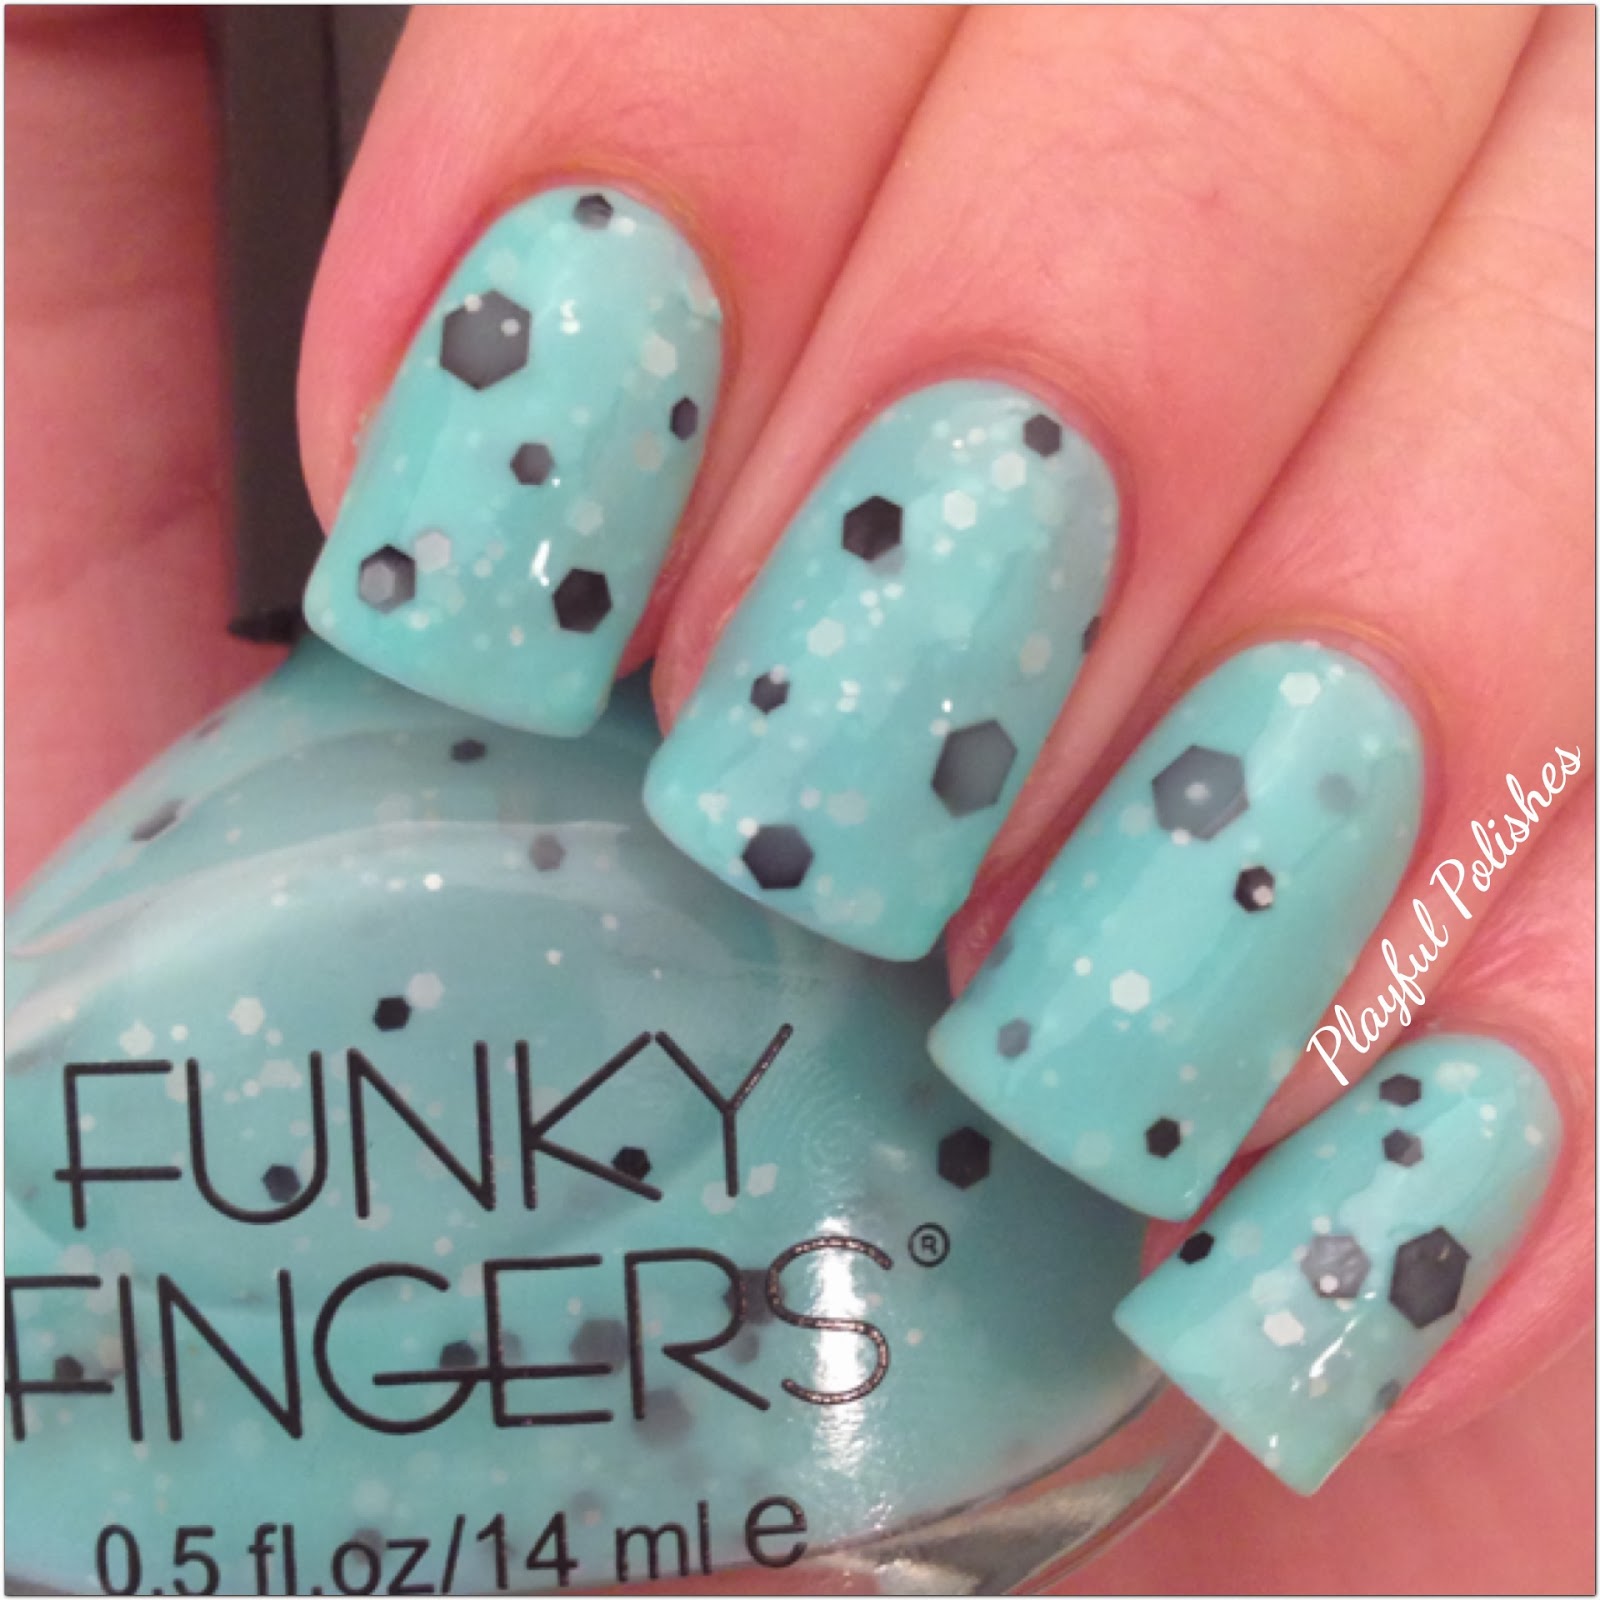 Playful Polishes: FUNKY FINGERS SWATCH & REVIEW